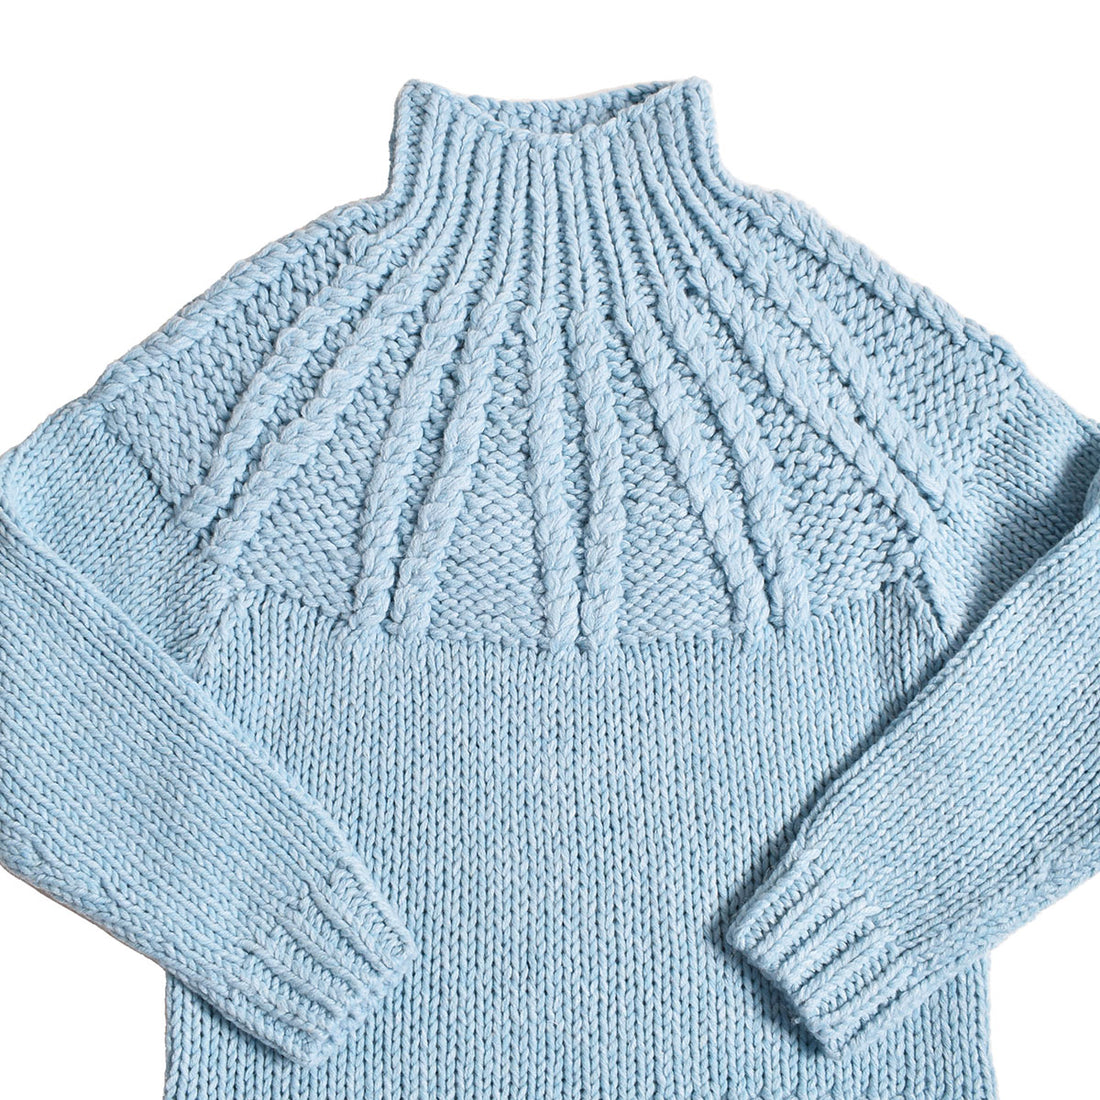 [CLANE]CHUNKY CABLE HAND KNIT TOPS/BLUE(15106-2312)